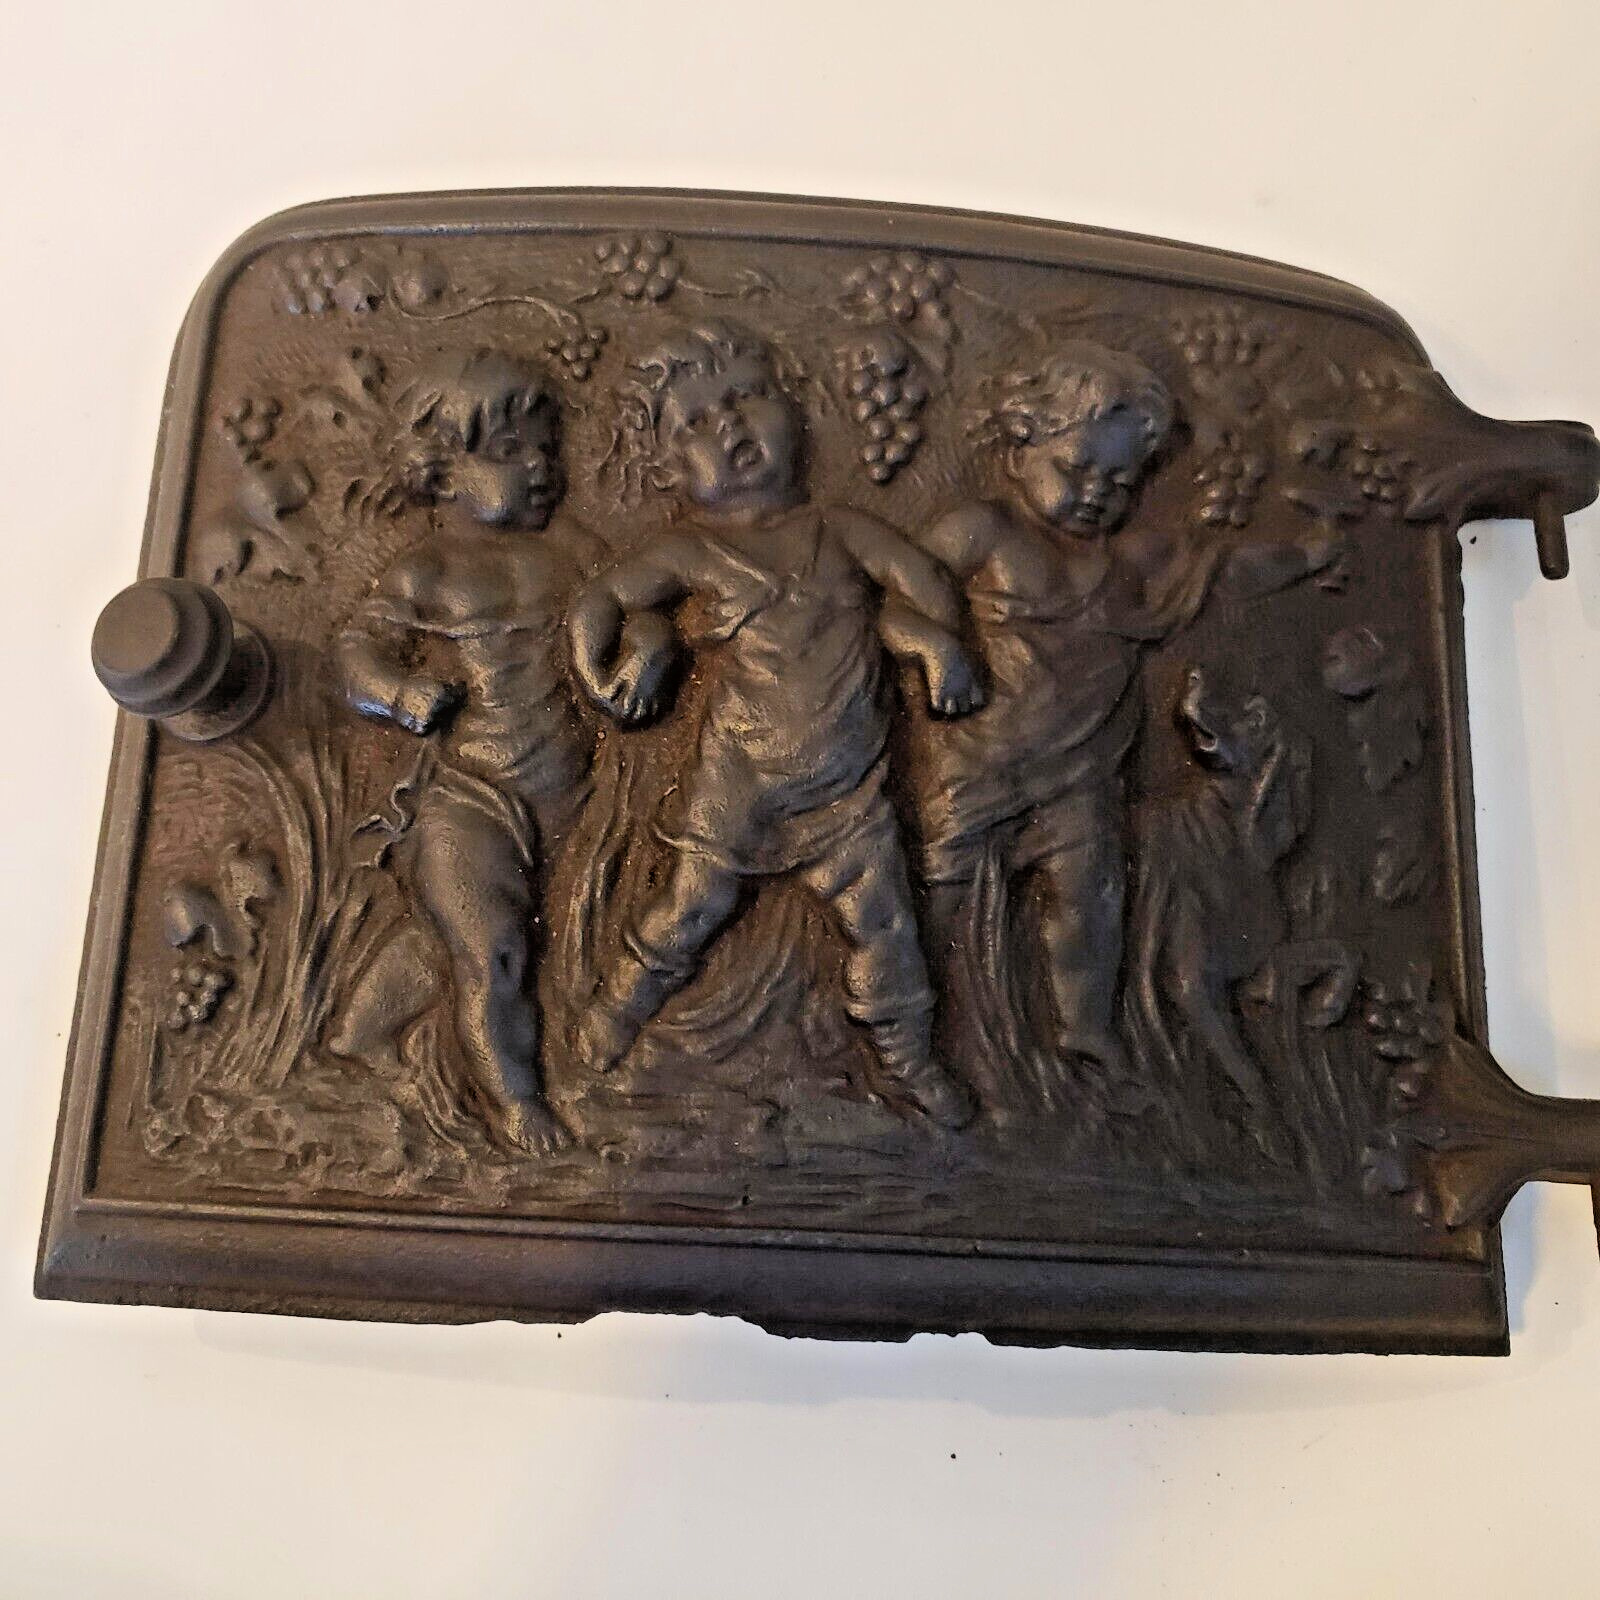 Old Cast Iron Ornate Curved Stove Door  - Three Cherubs and Dog